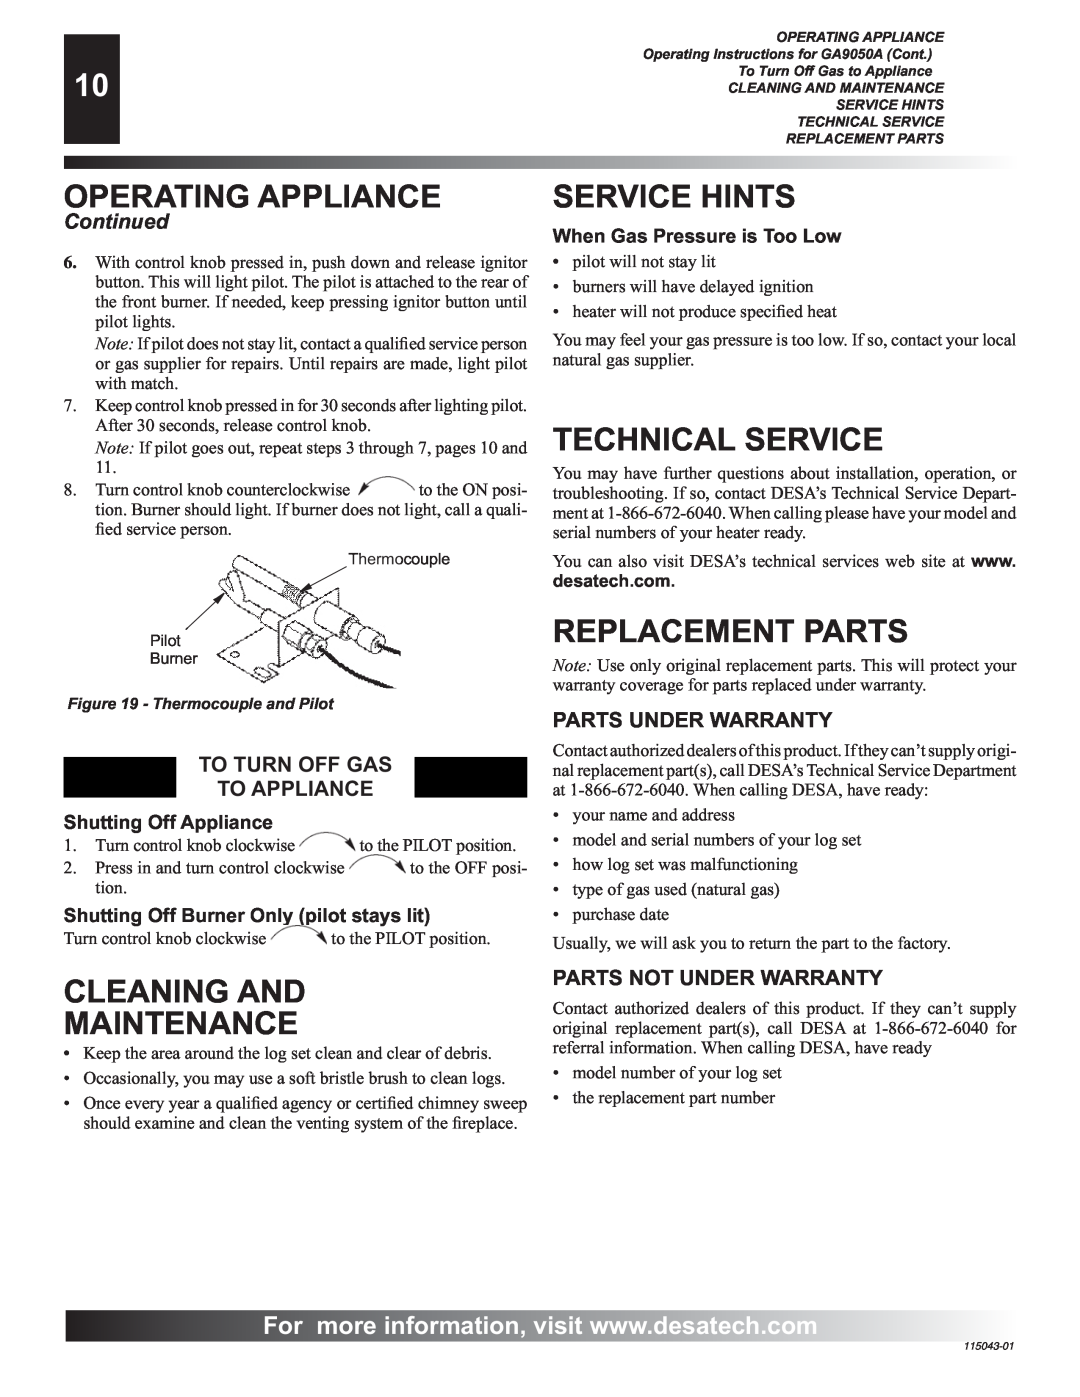 Desa RGA 2-72 Service Hints, Technical Service, Replacement Parts, Cleaning And Maintenance, Operating Appliance 